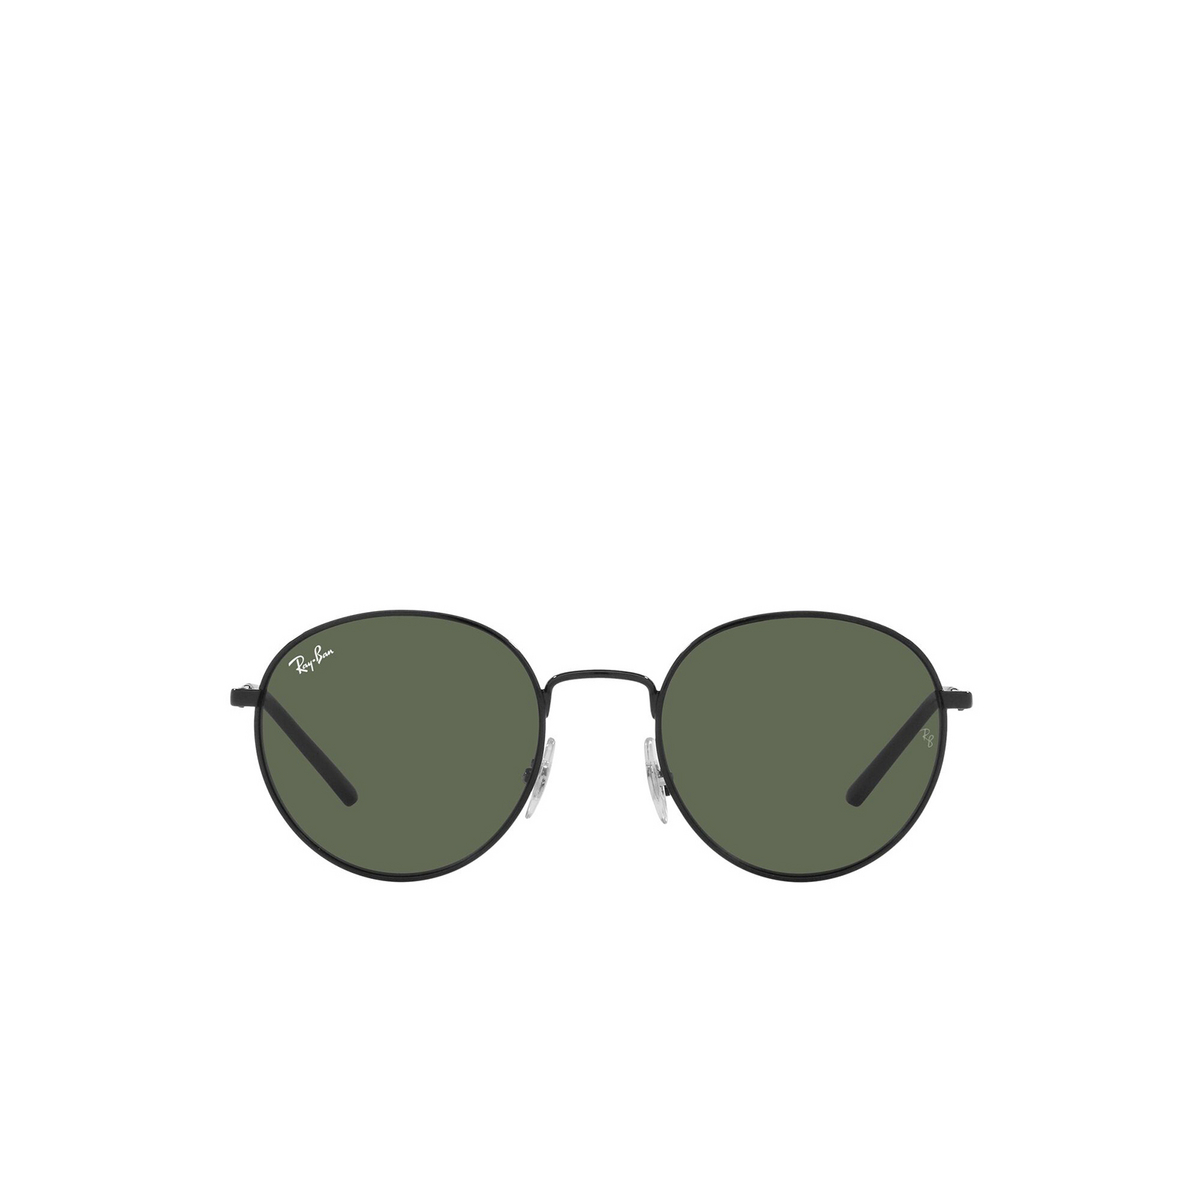 Ray-Ban® Round Sunglasses: RB3681 color Black 002/71 - front view.